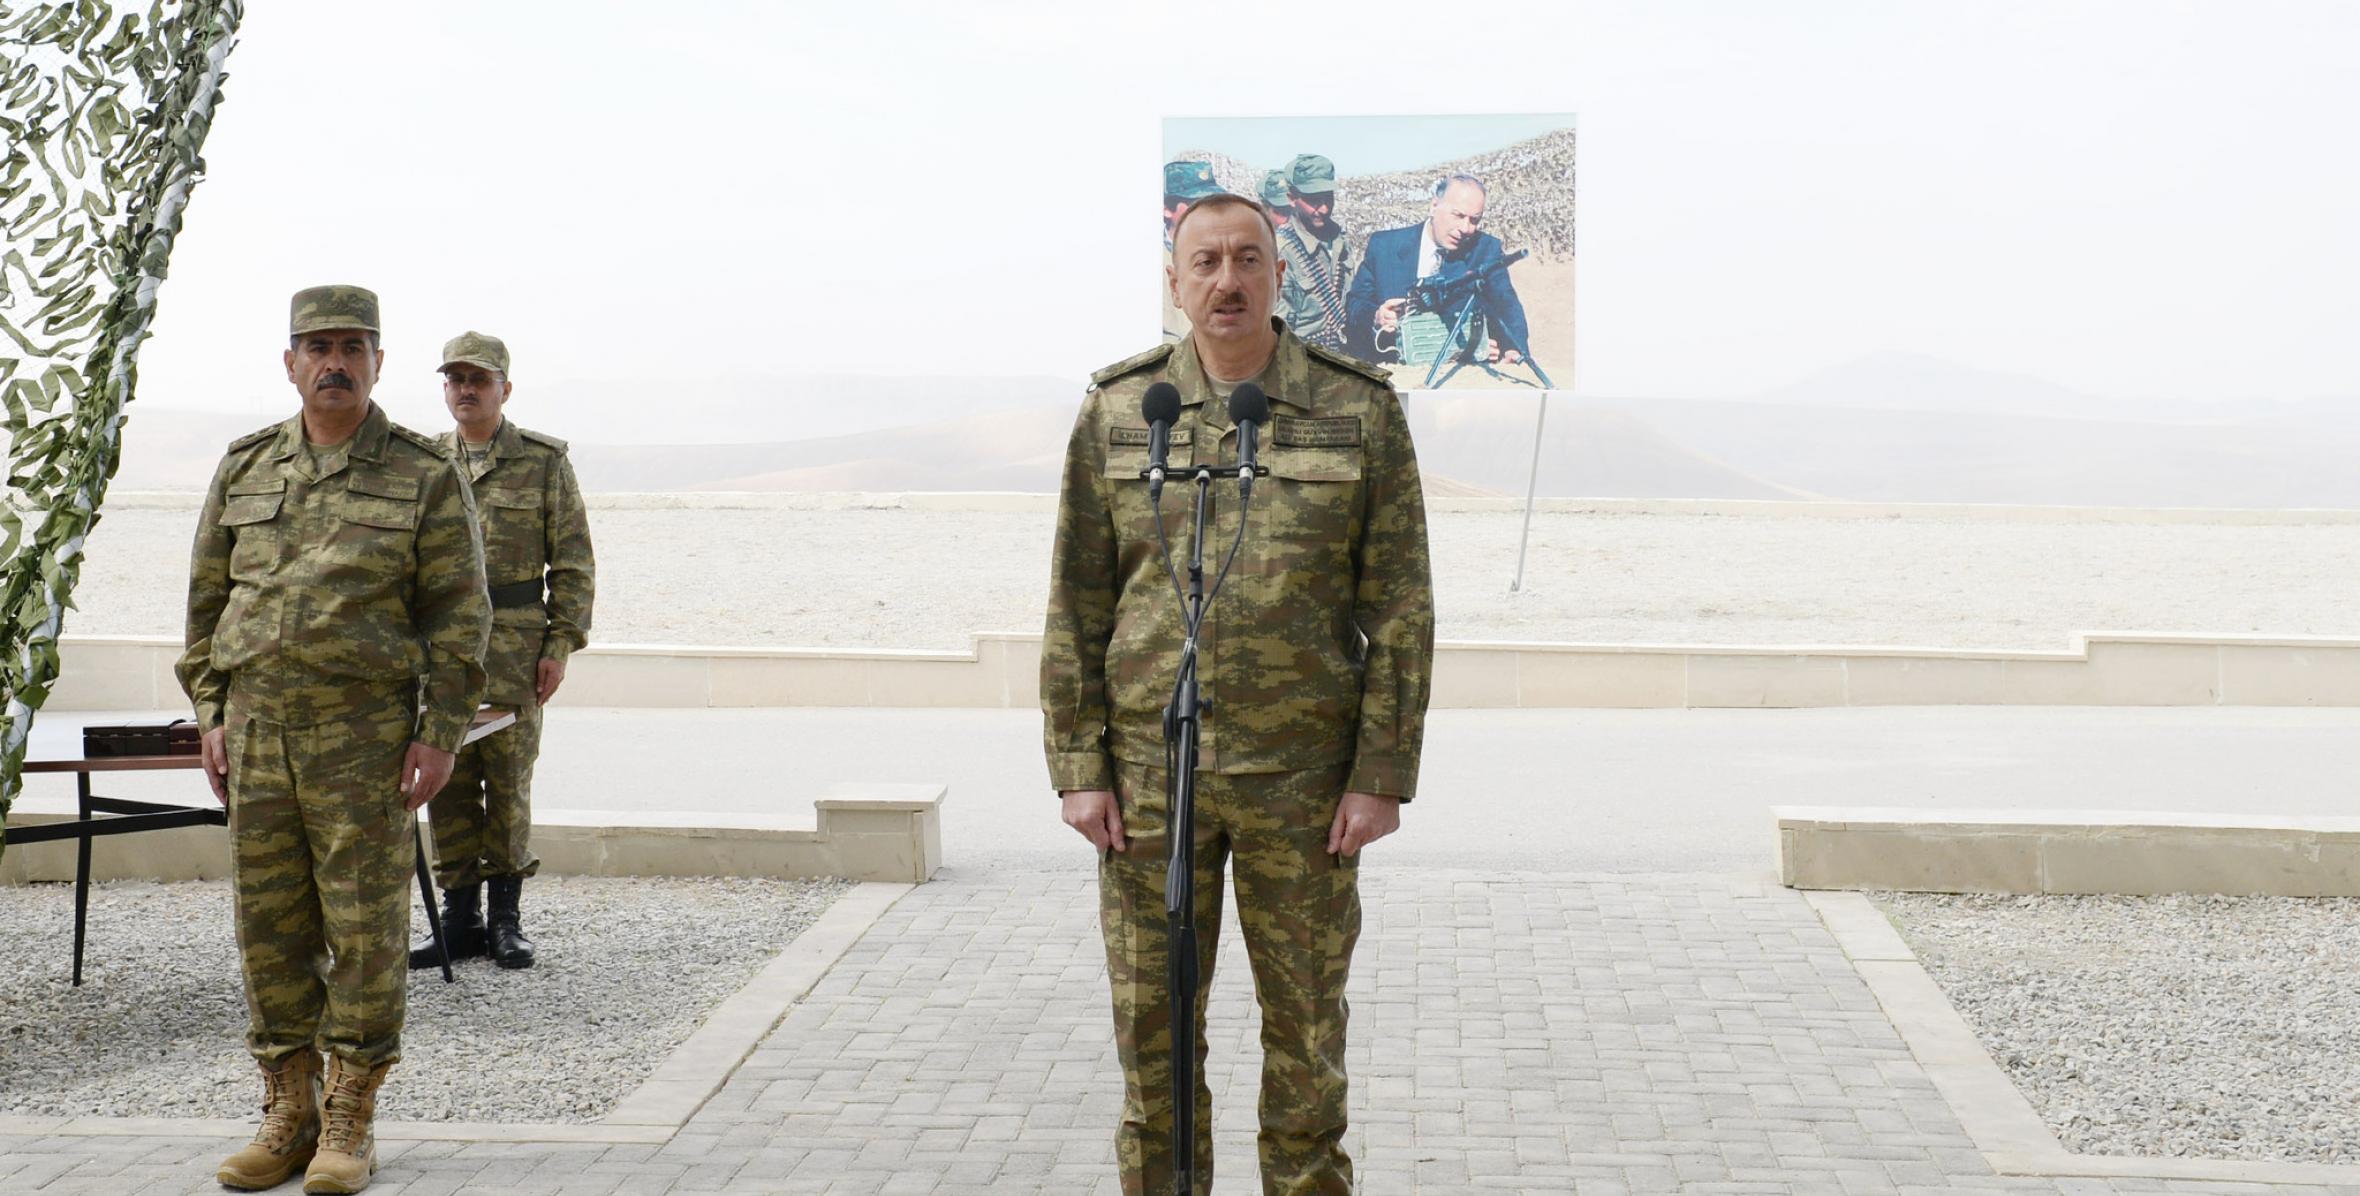 Speech by Ilham Aliyev at the joint operational and tactical exercises of the formations and units of the Ministry of Defense, Internal Troops of the Ministry of Internal Affairs and the State Border Service on the occasion of the 96th anniversary of the establishment of the Armed Forces of Azerbaijan